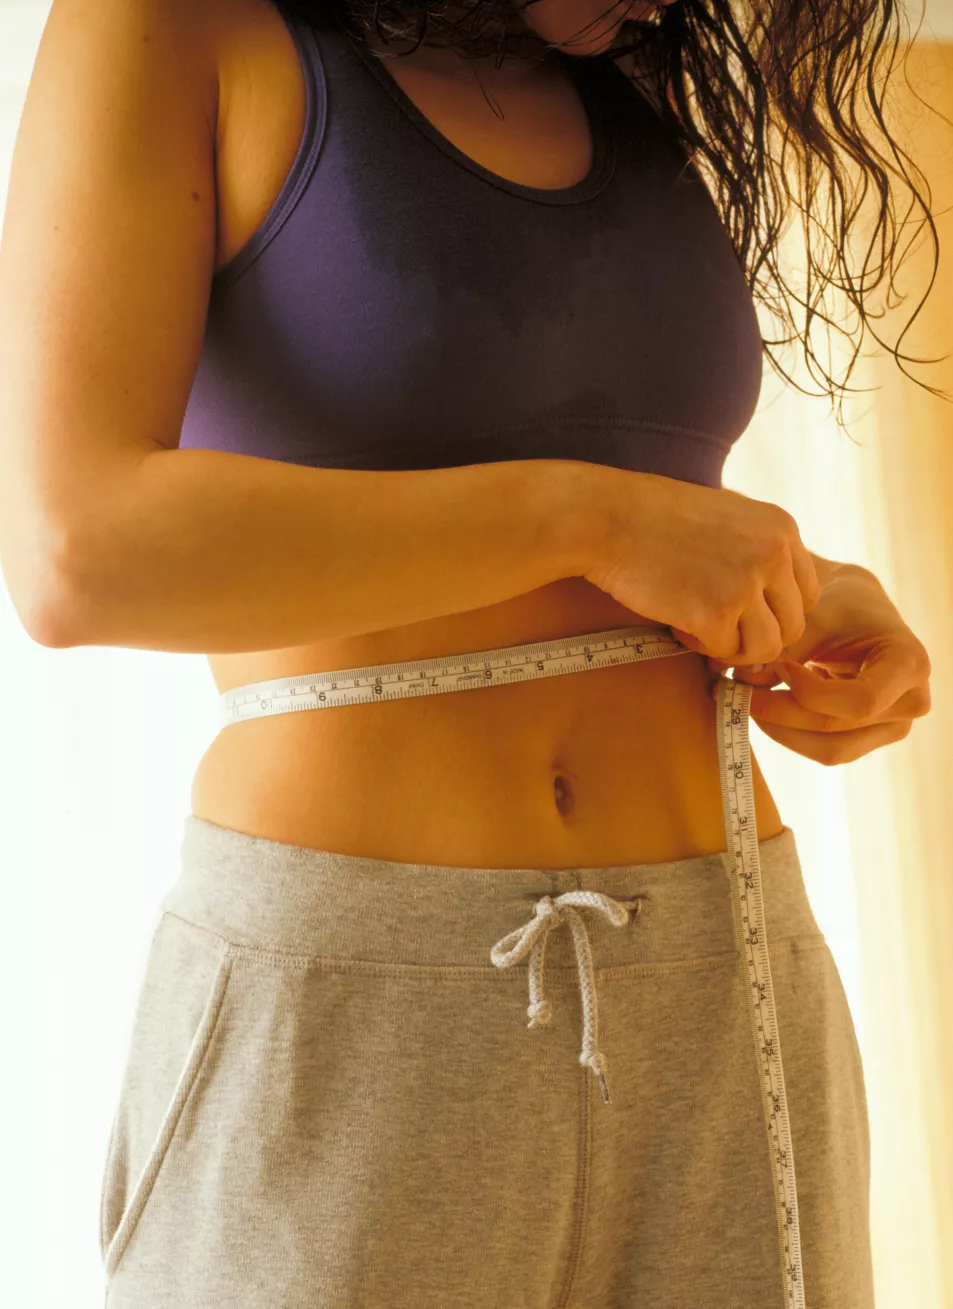 Exercises to trim your waist and make you feel super strong